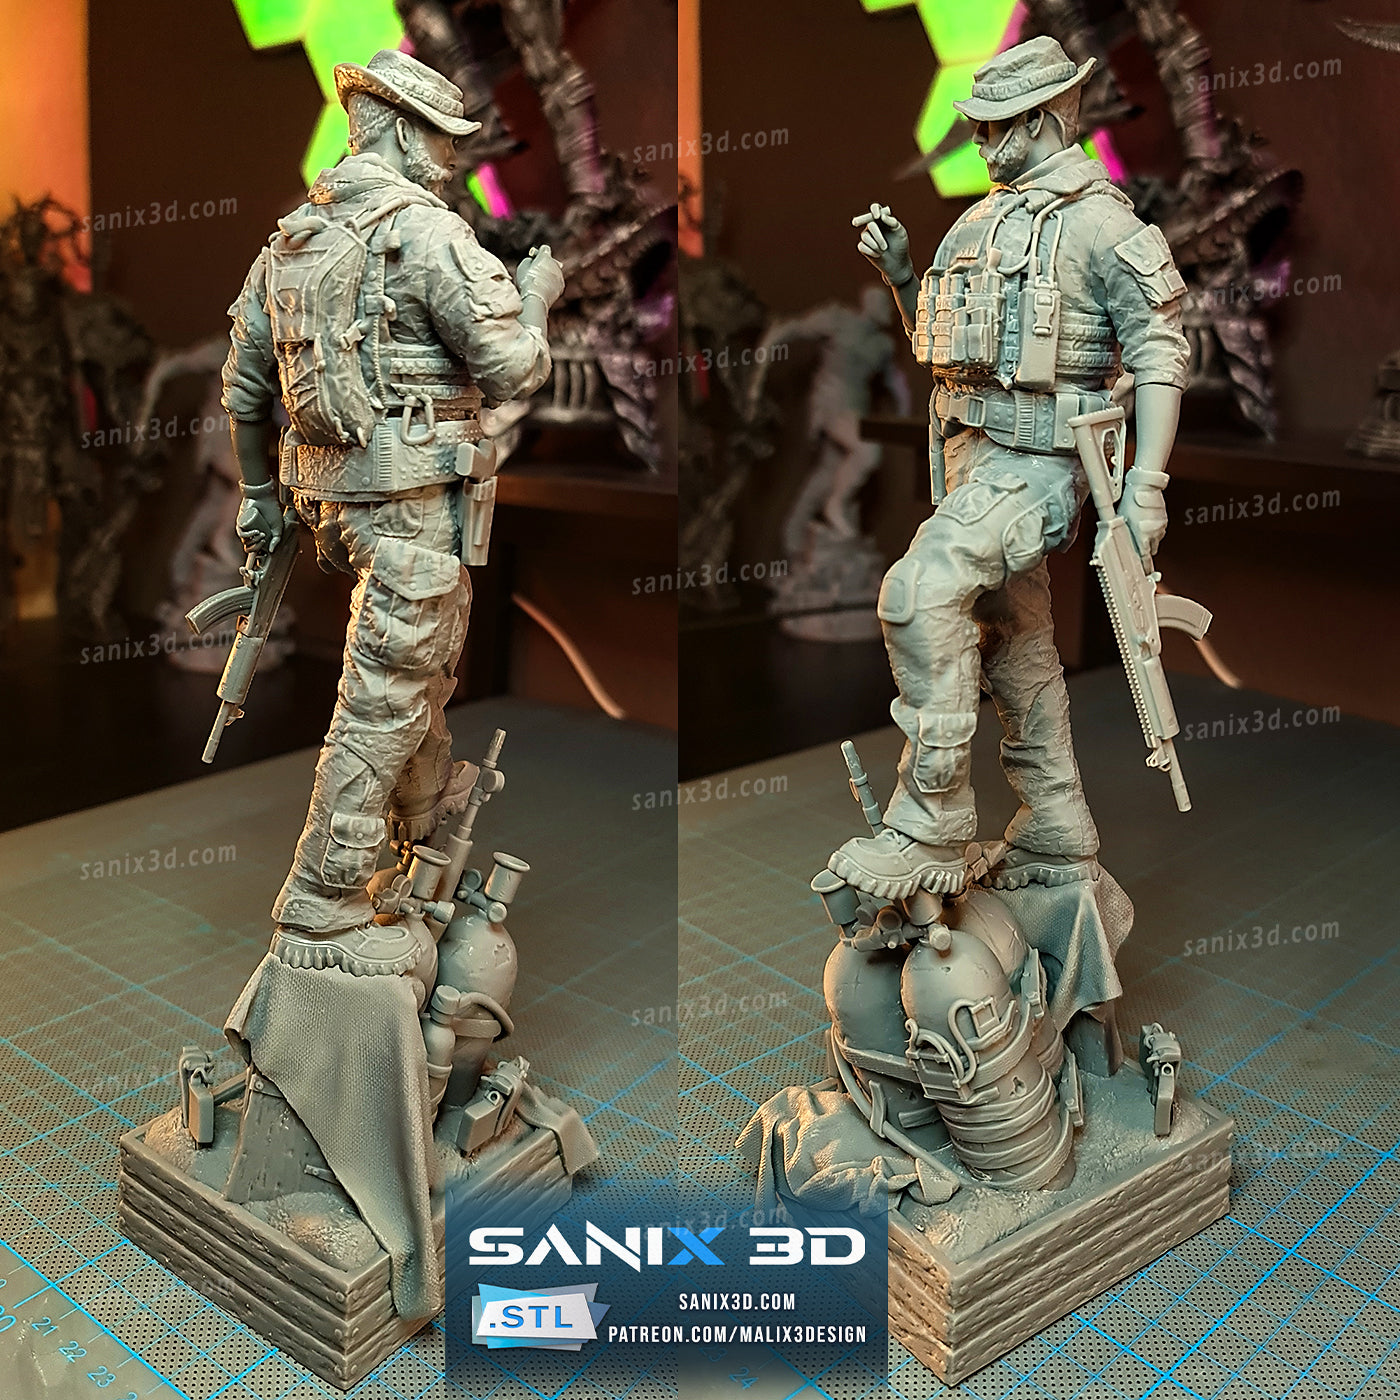 Captain Price (Call of Duty) - 3D Resin Printed - 10th scale (264mm) - Fan Art